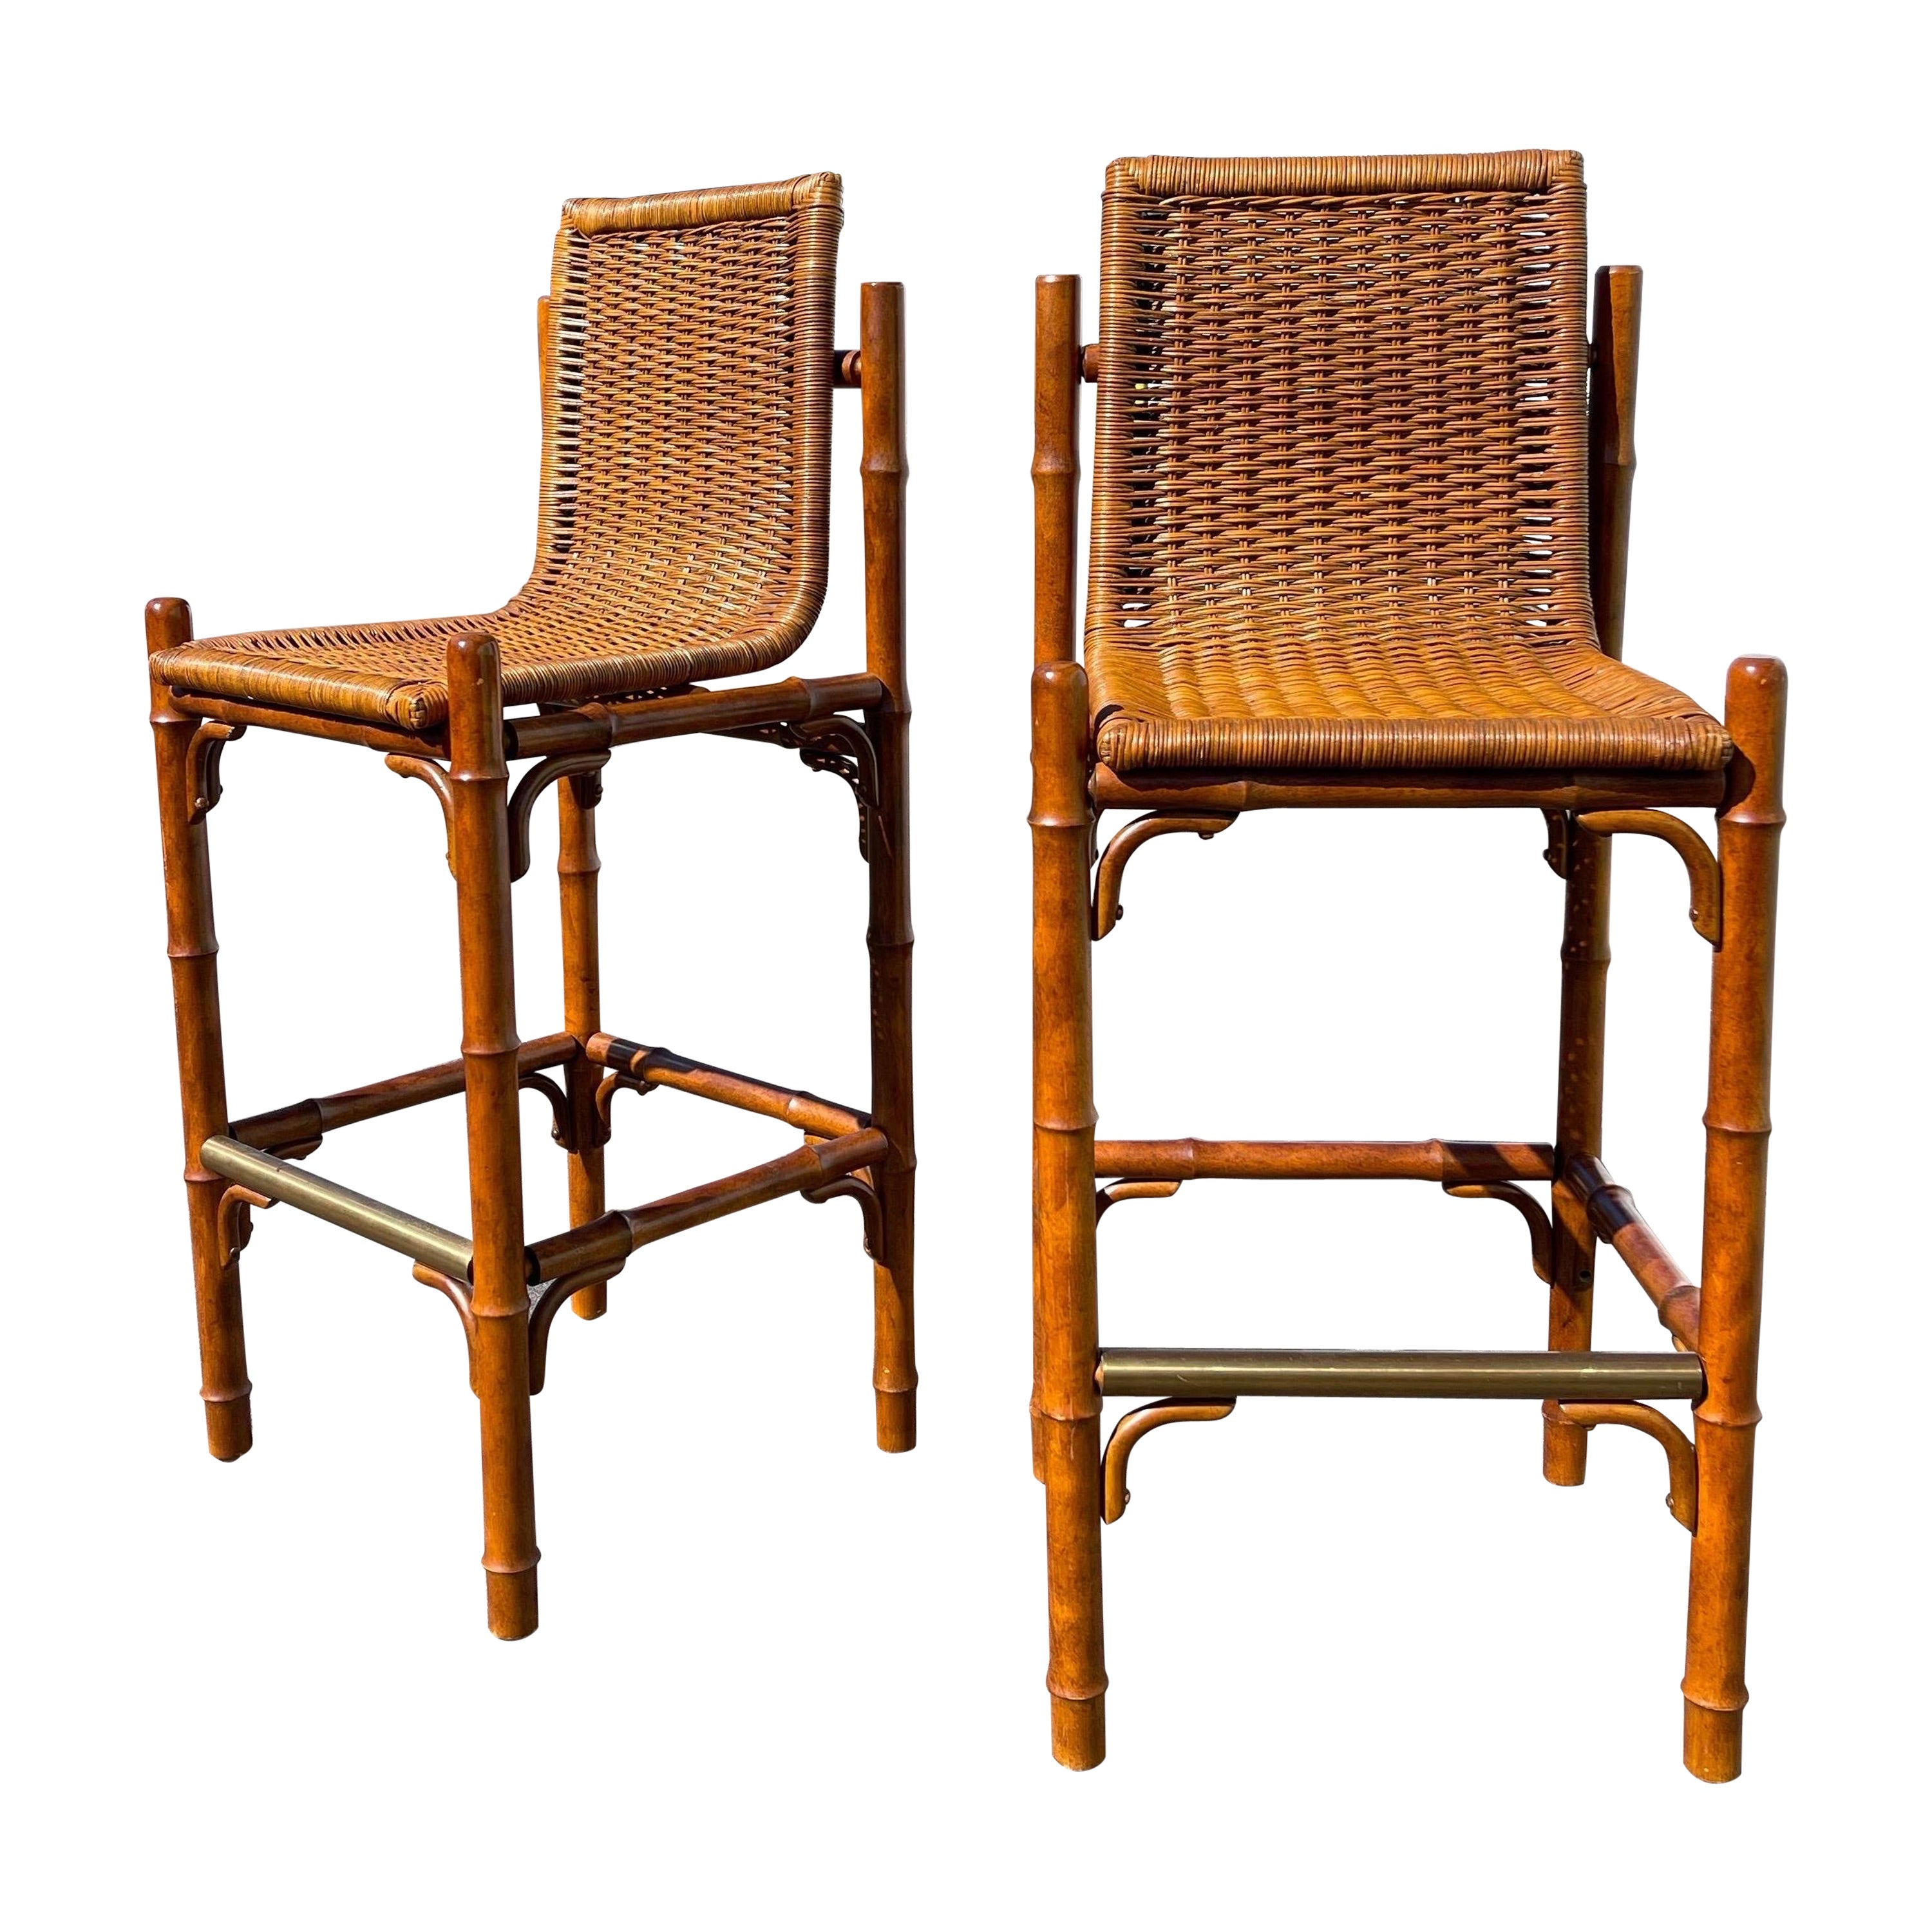 Mid-Century Faux Bamboo Wicker Barstools, a Pair